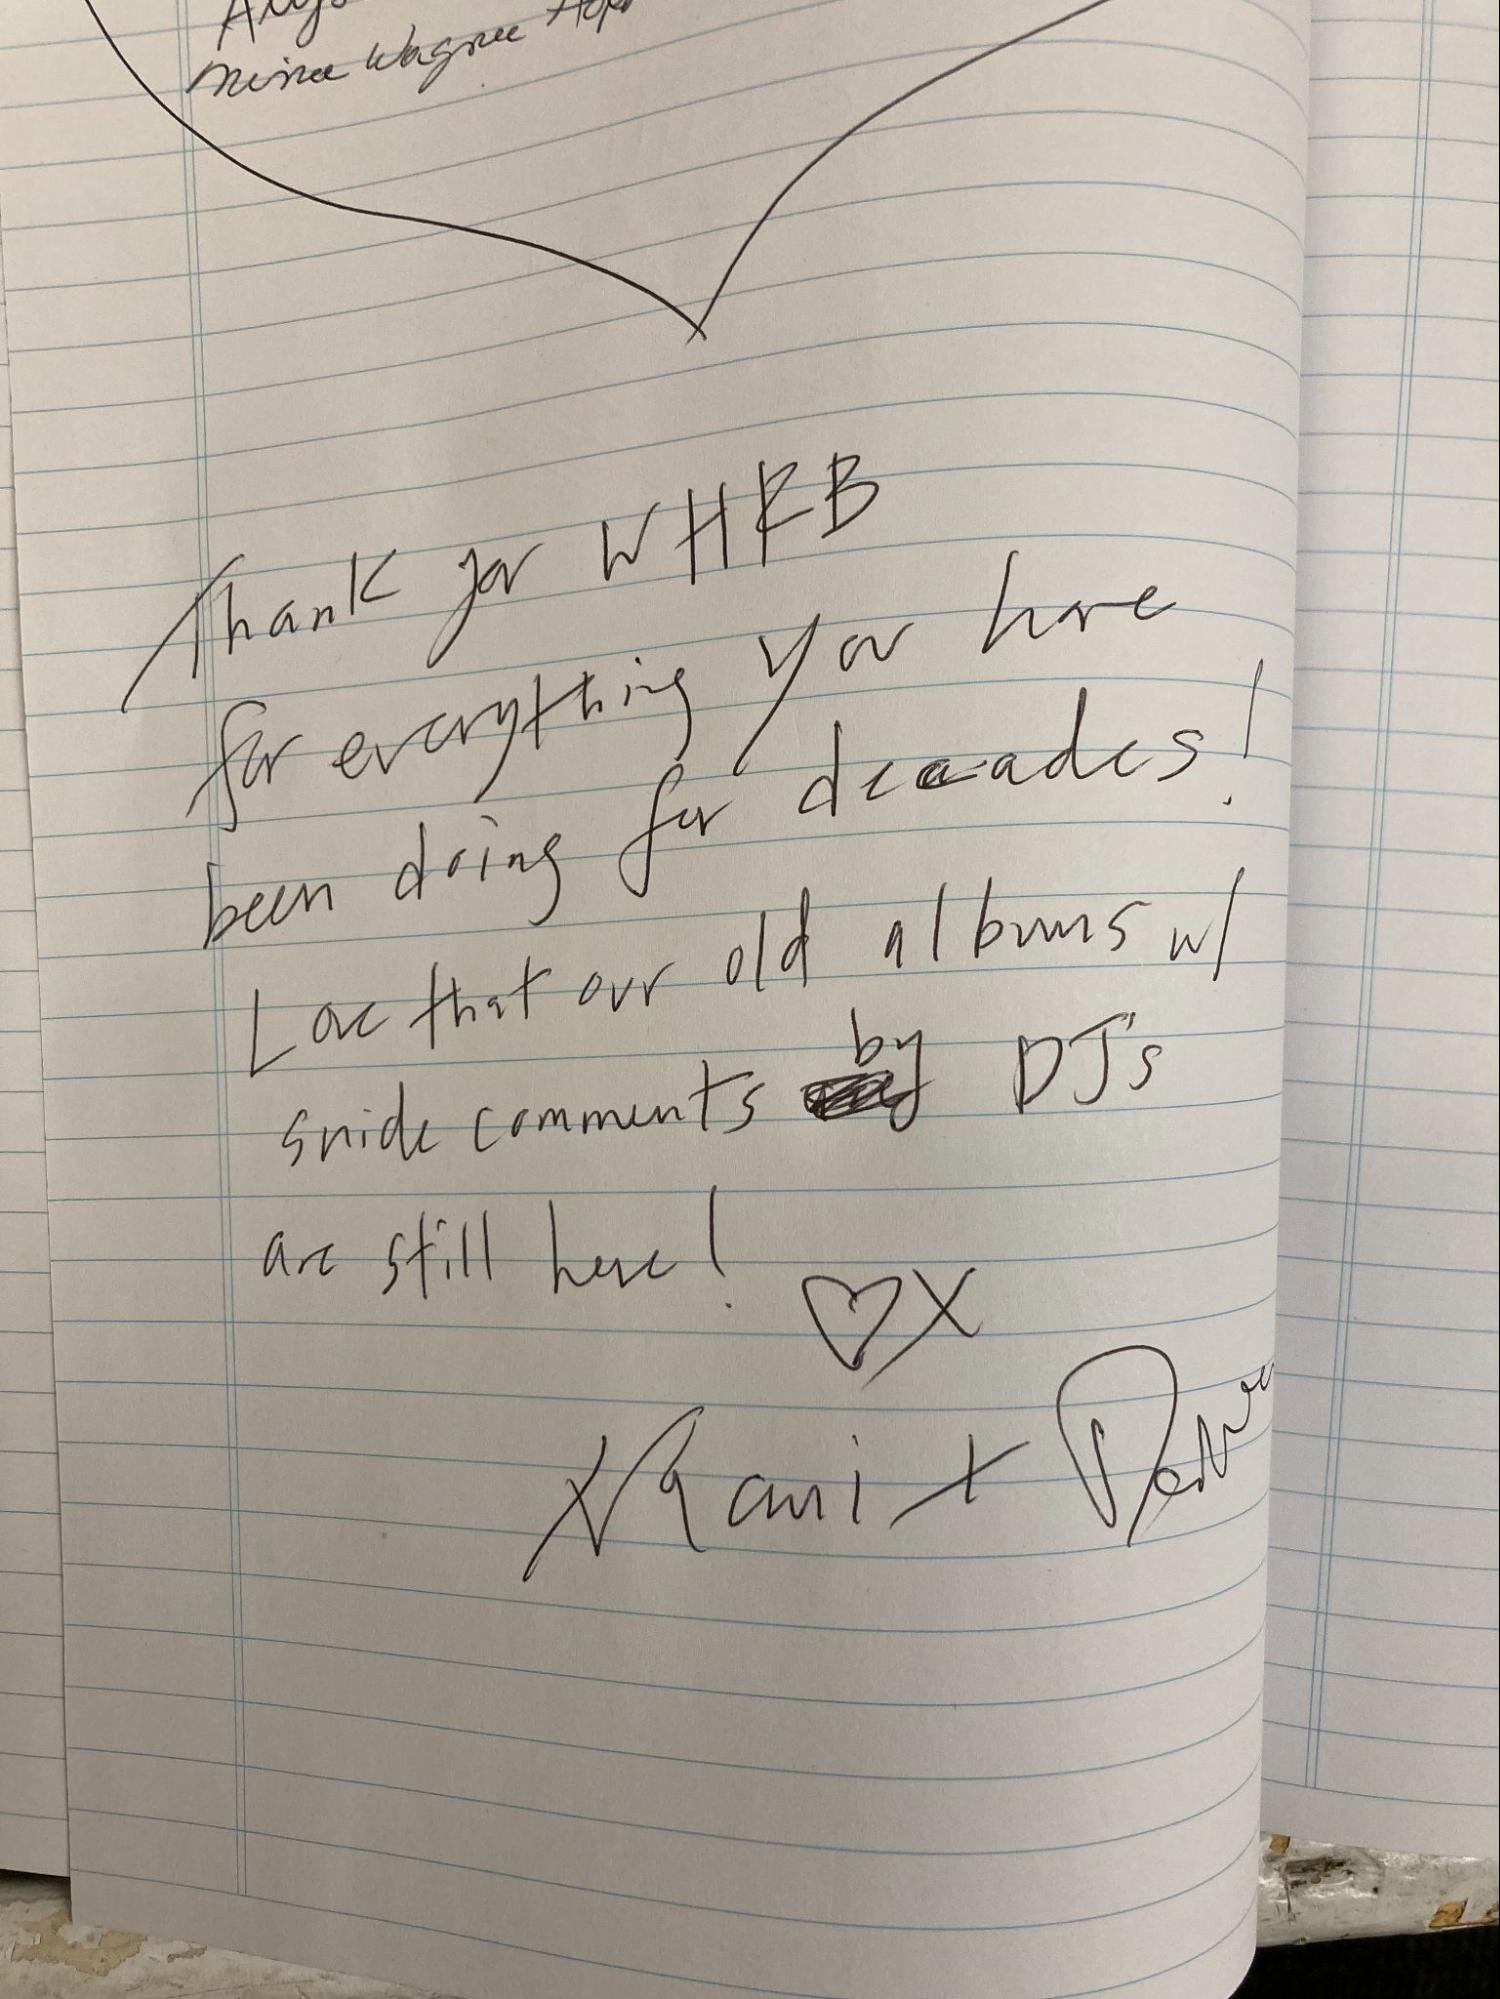 “Note from Naomi and Damon in WHRB guestbook”